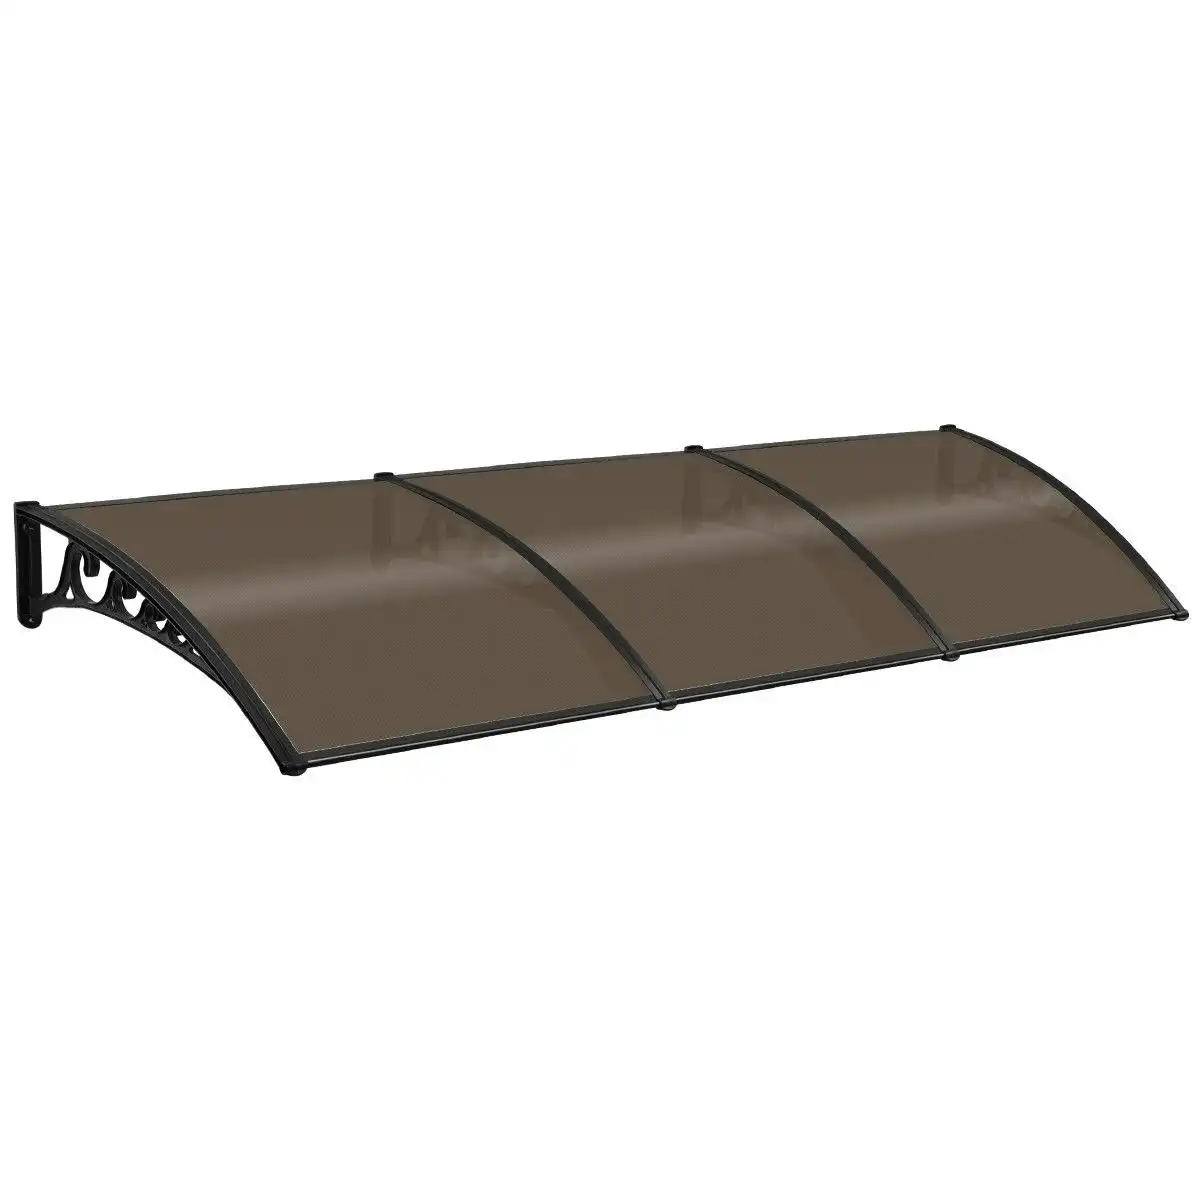 Ausway Brown Rain Proof Shade Rain Cover Canopy Awning  3M